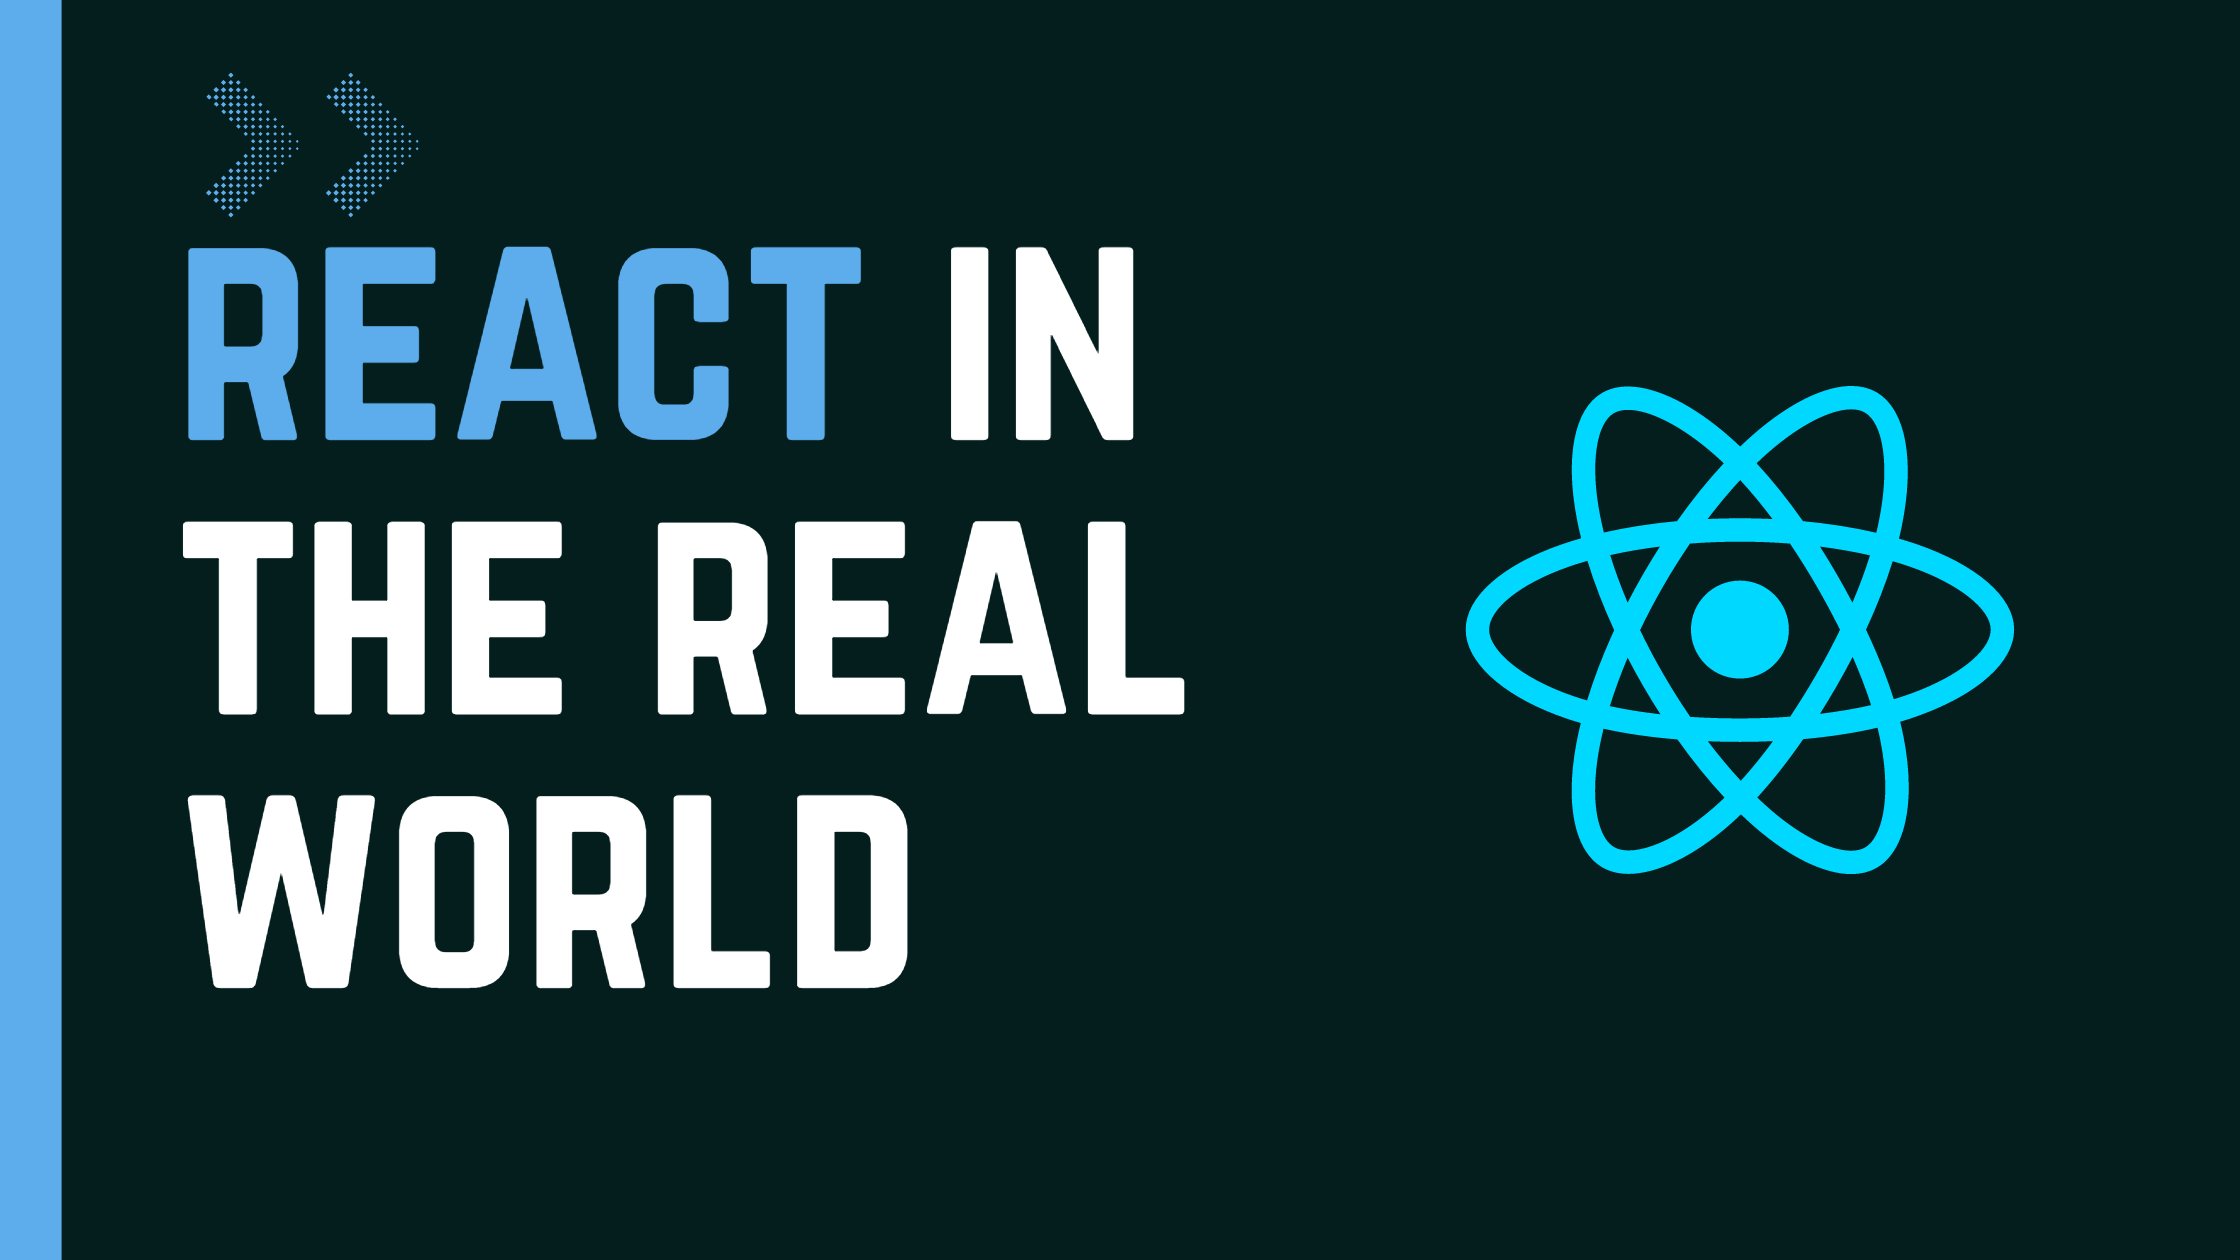 Using React in a real world application
